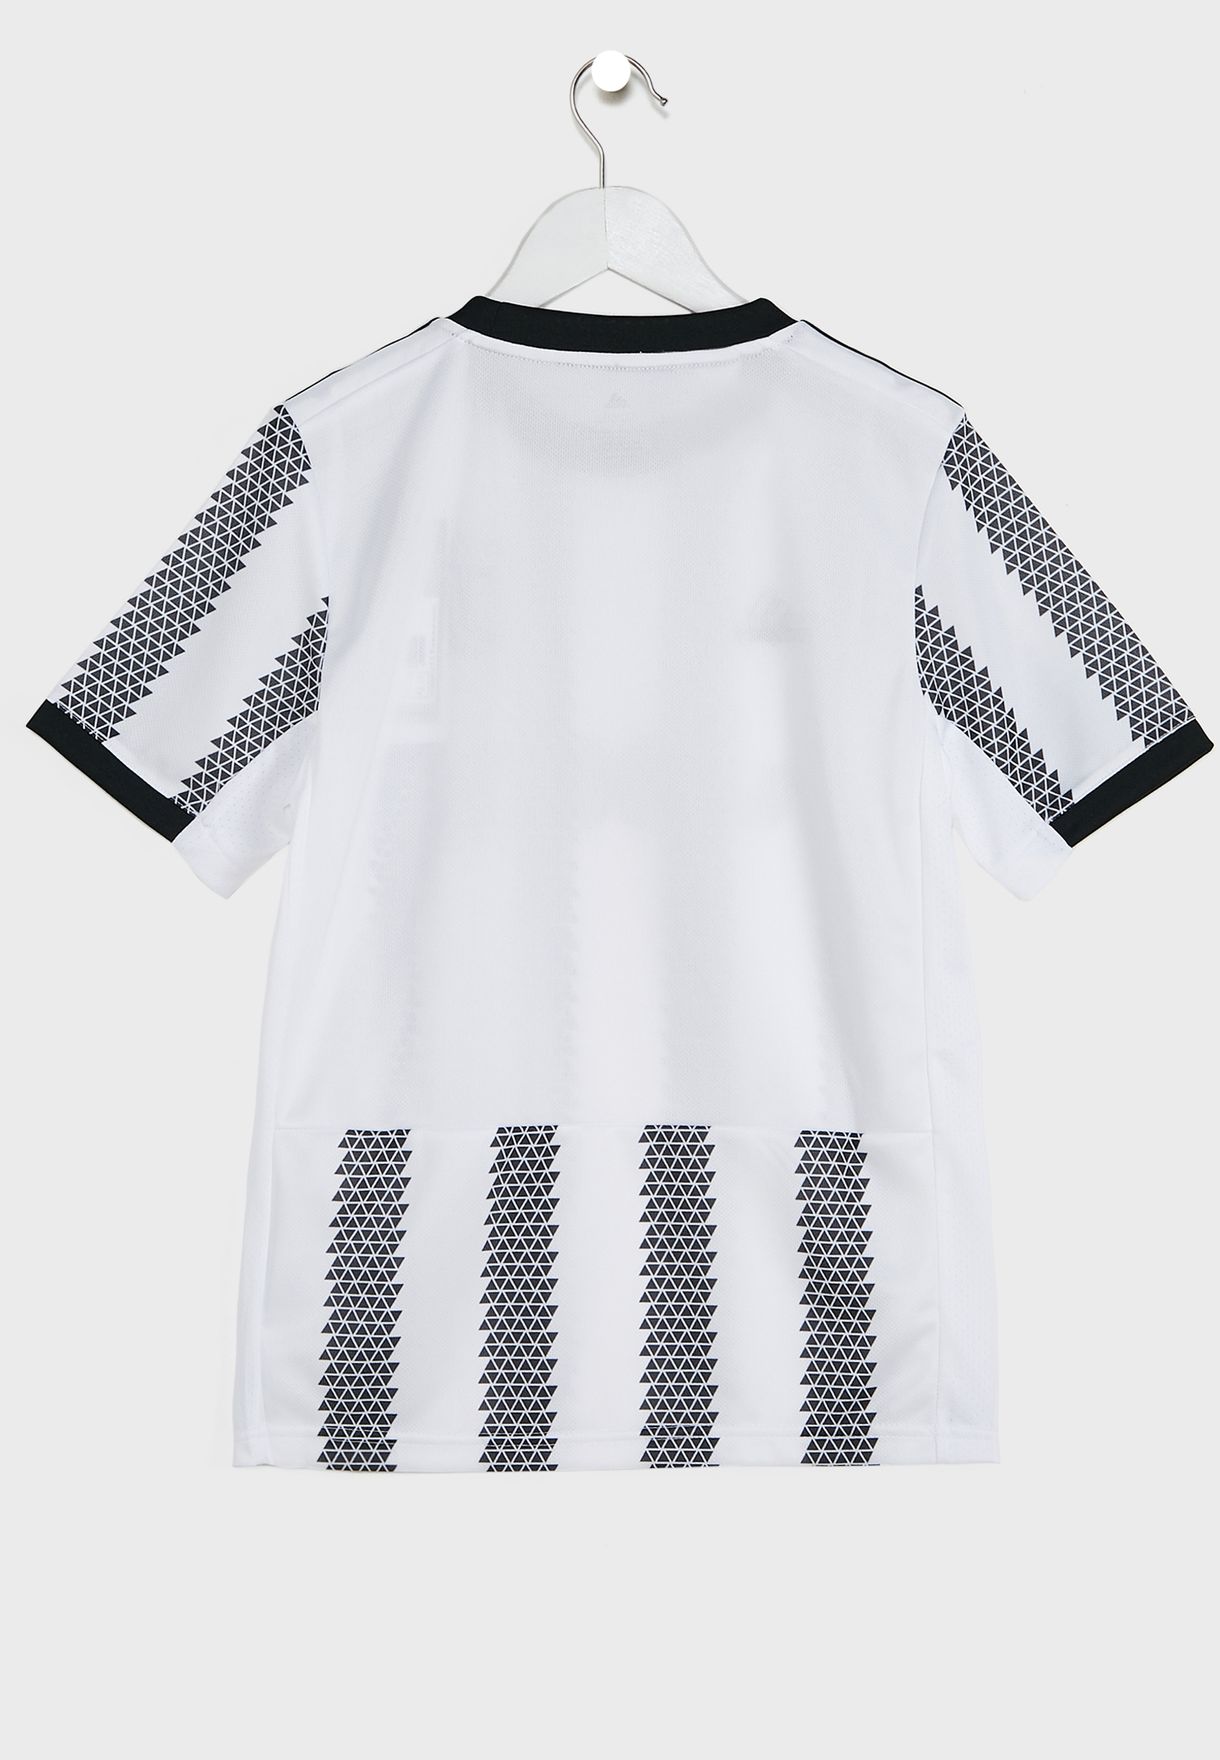 Youth Juve Home T-Shirt